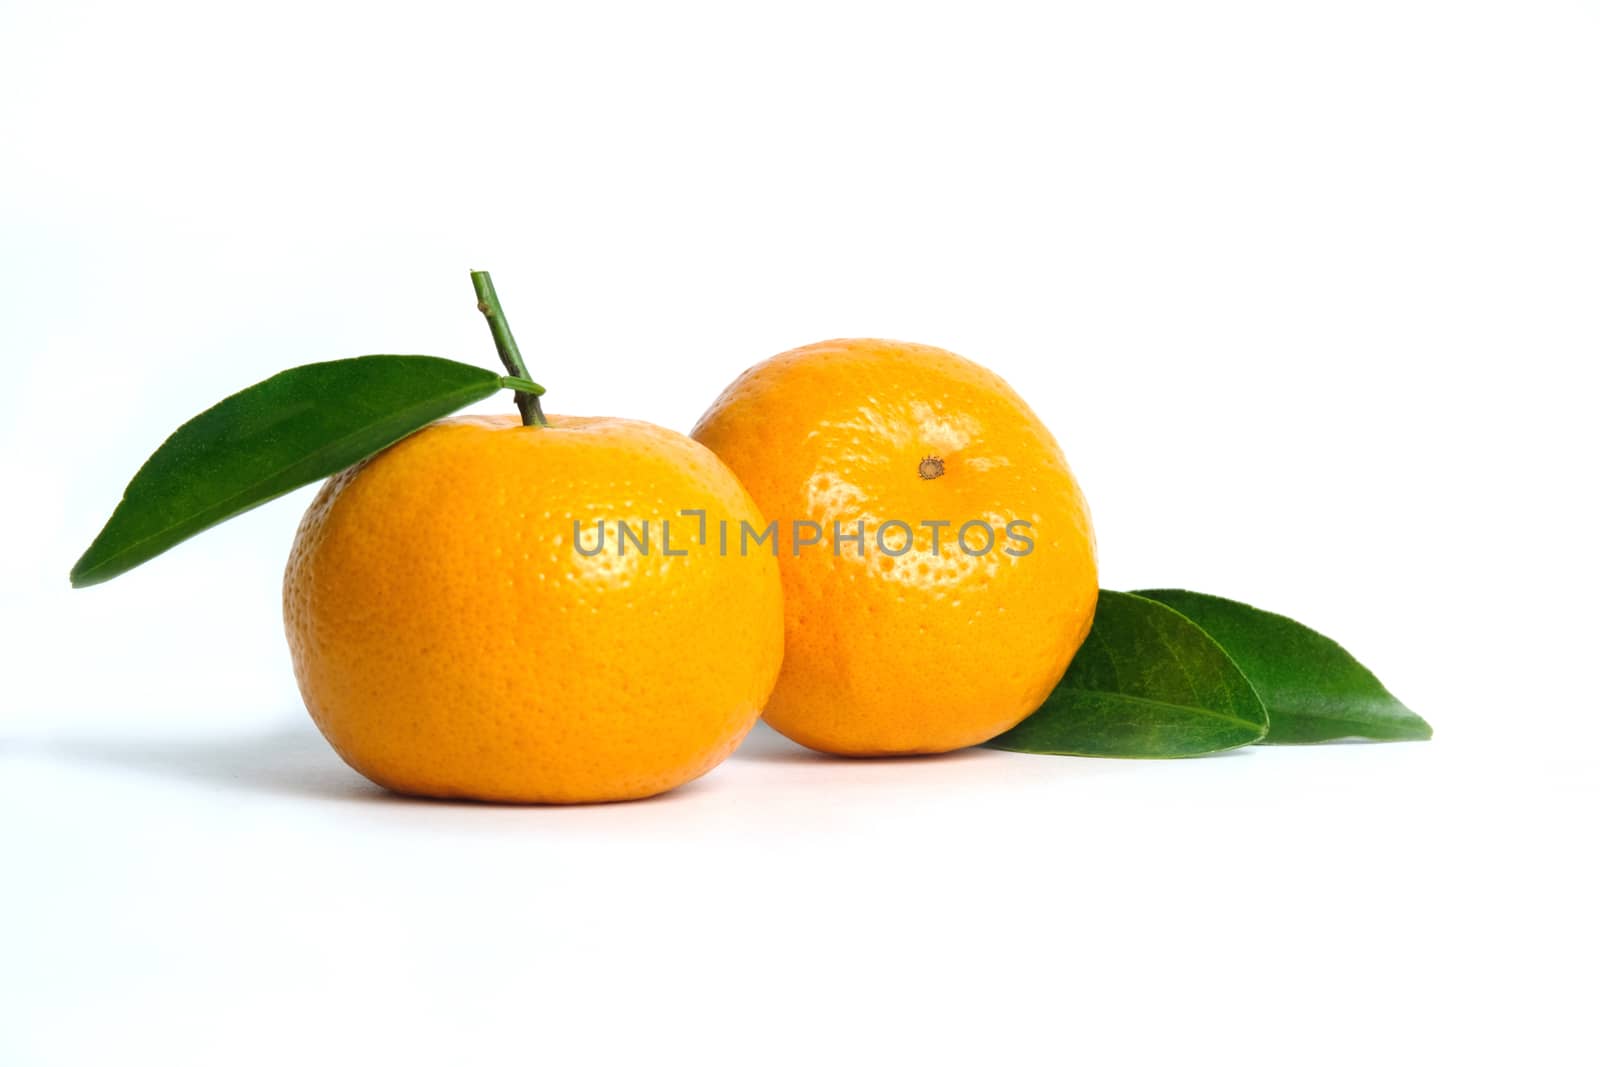 Two raw fruit of Citrus sinensis ( called jeruk baby santang ) with leaves isolated on white background – local fresh fruit from Indonesia